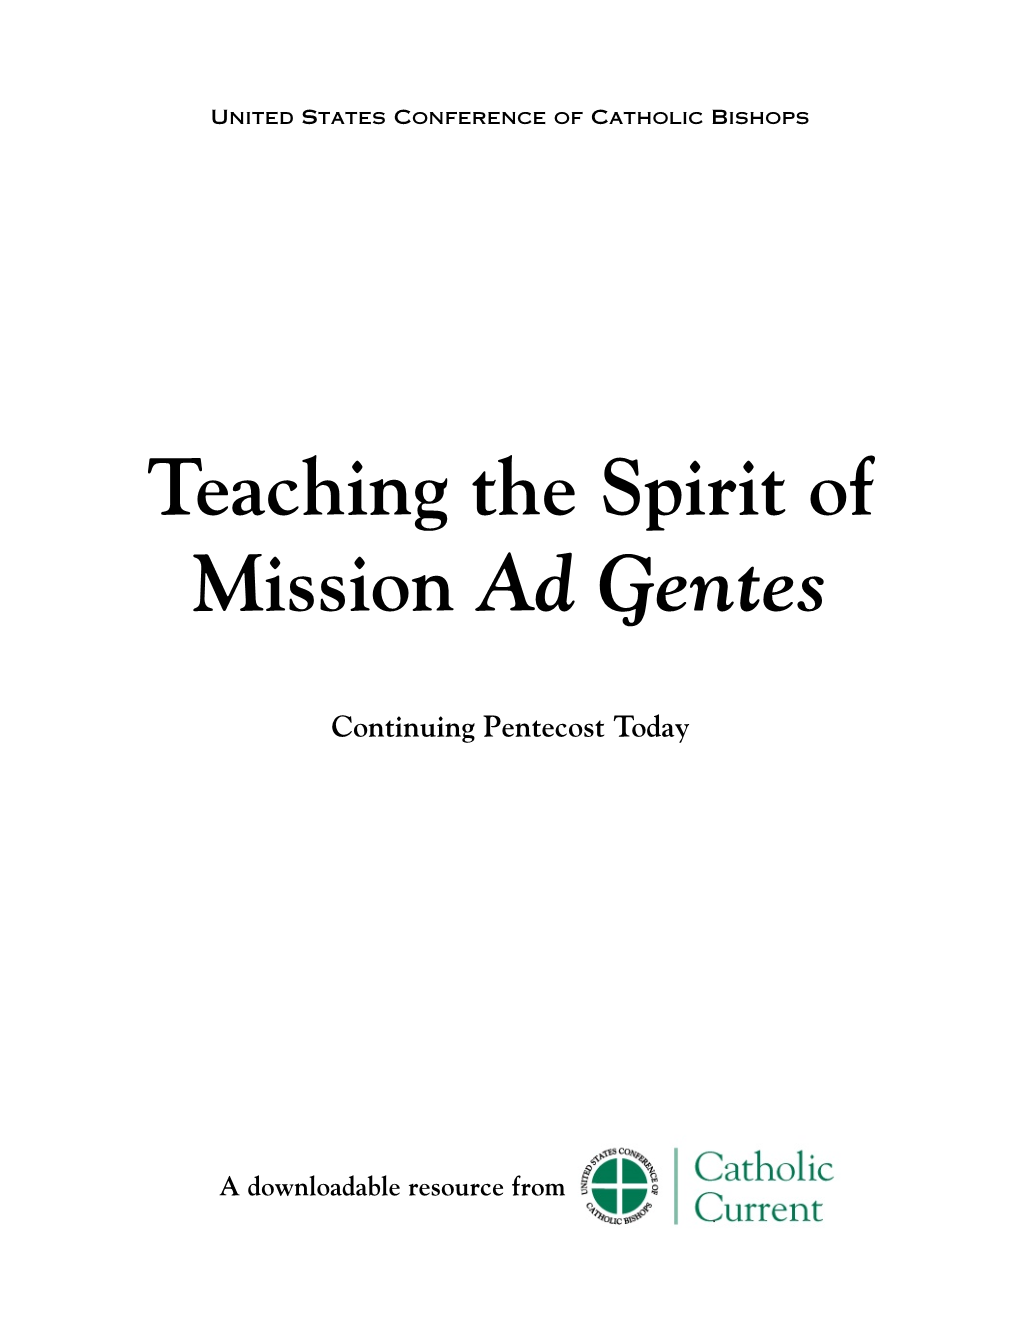 Teaching the Spirit of Mission Ad Gentes